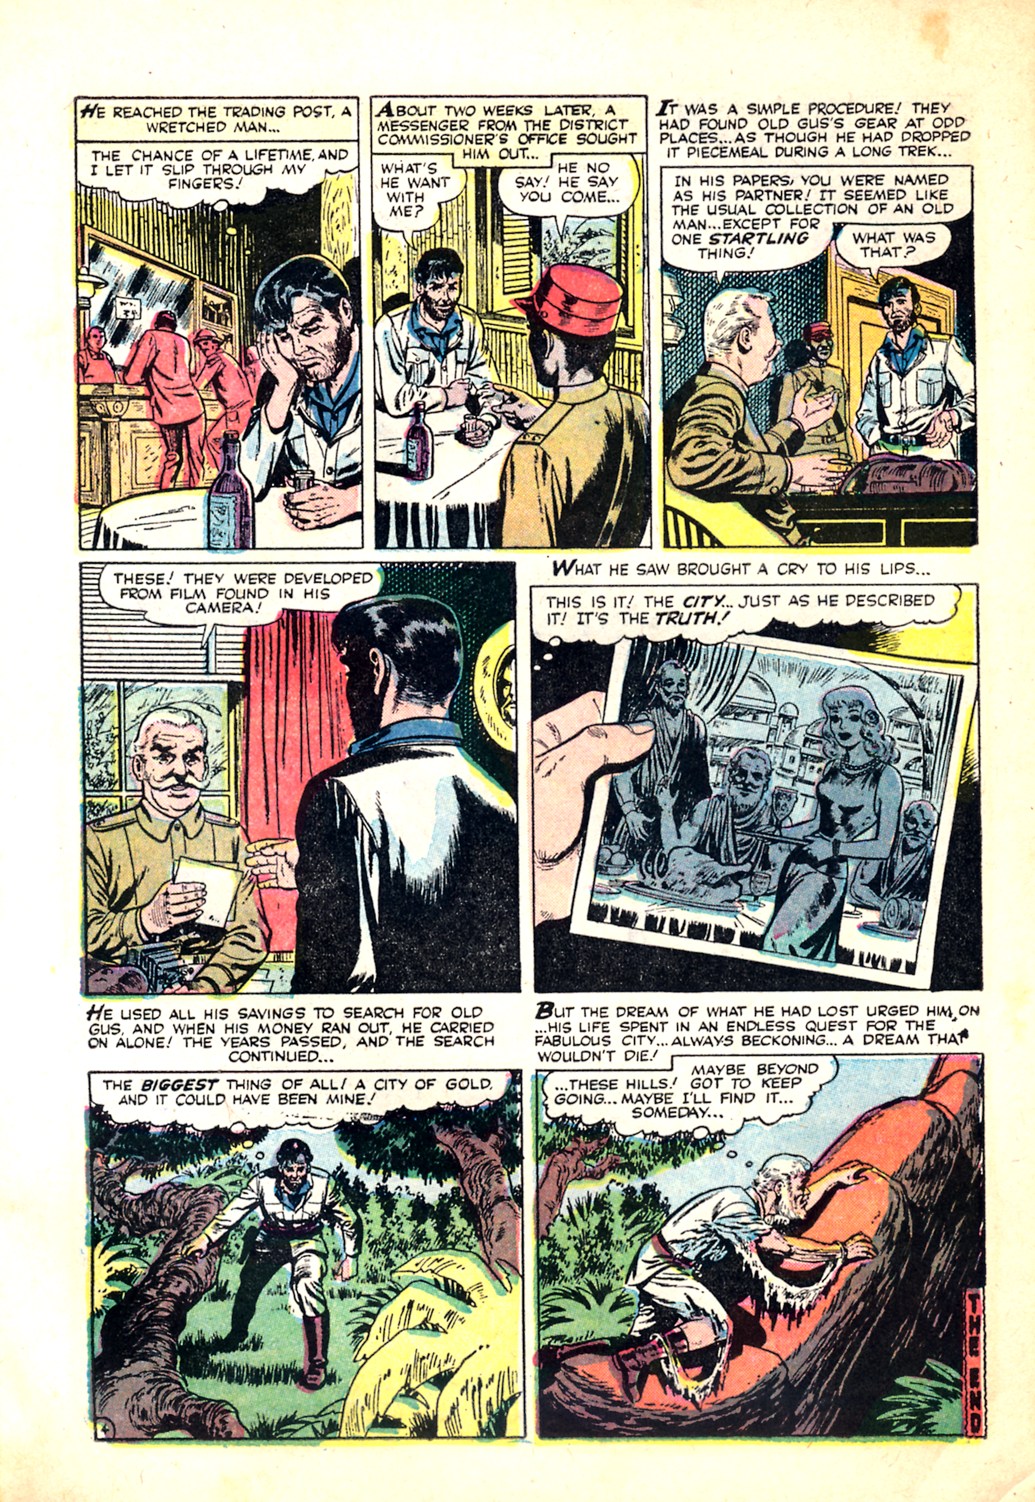 Marvel Tales (1949) 149 Page 5